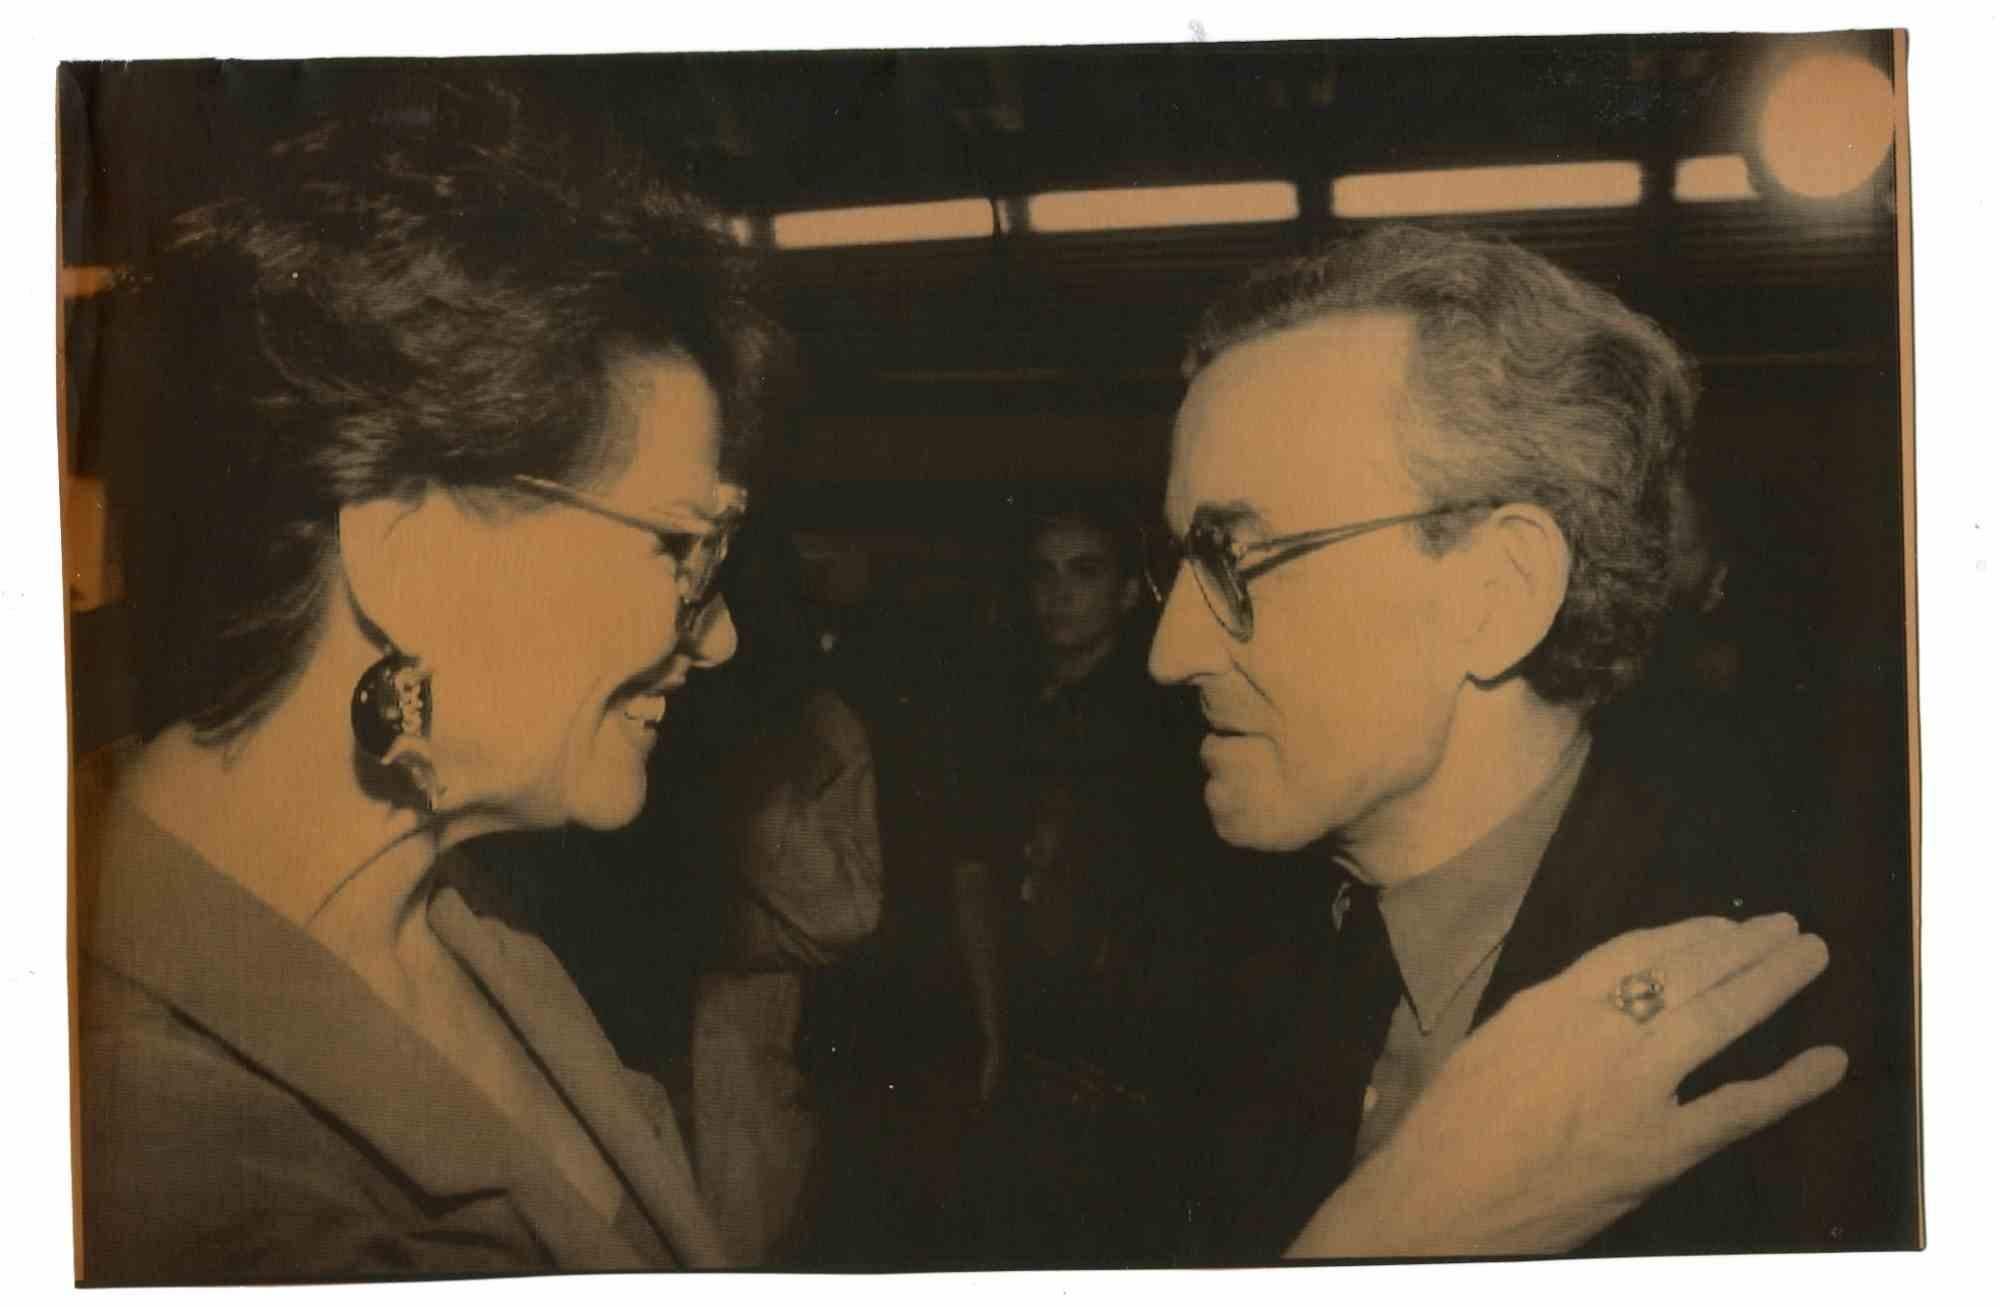 Unknown Figurative Photograph - Louis Malle and Claudia Cardinale - Vintage Photo - 1990s